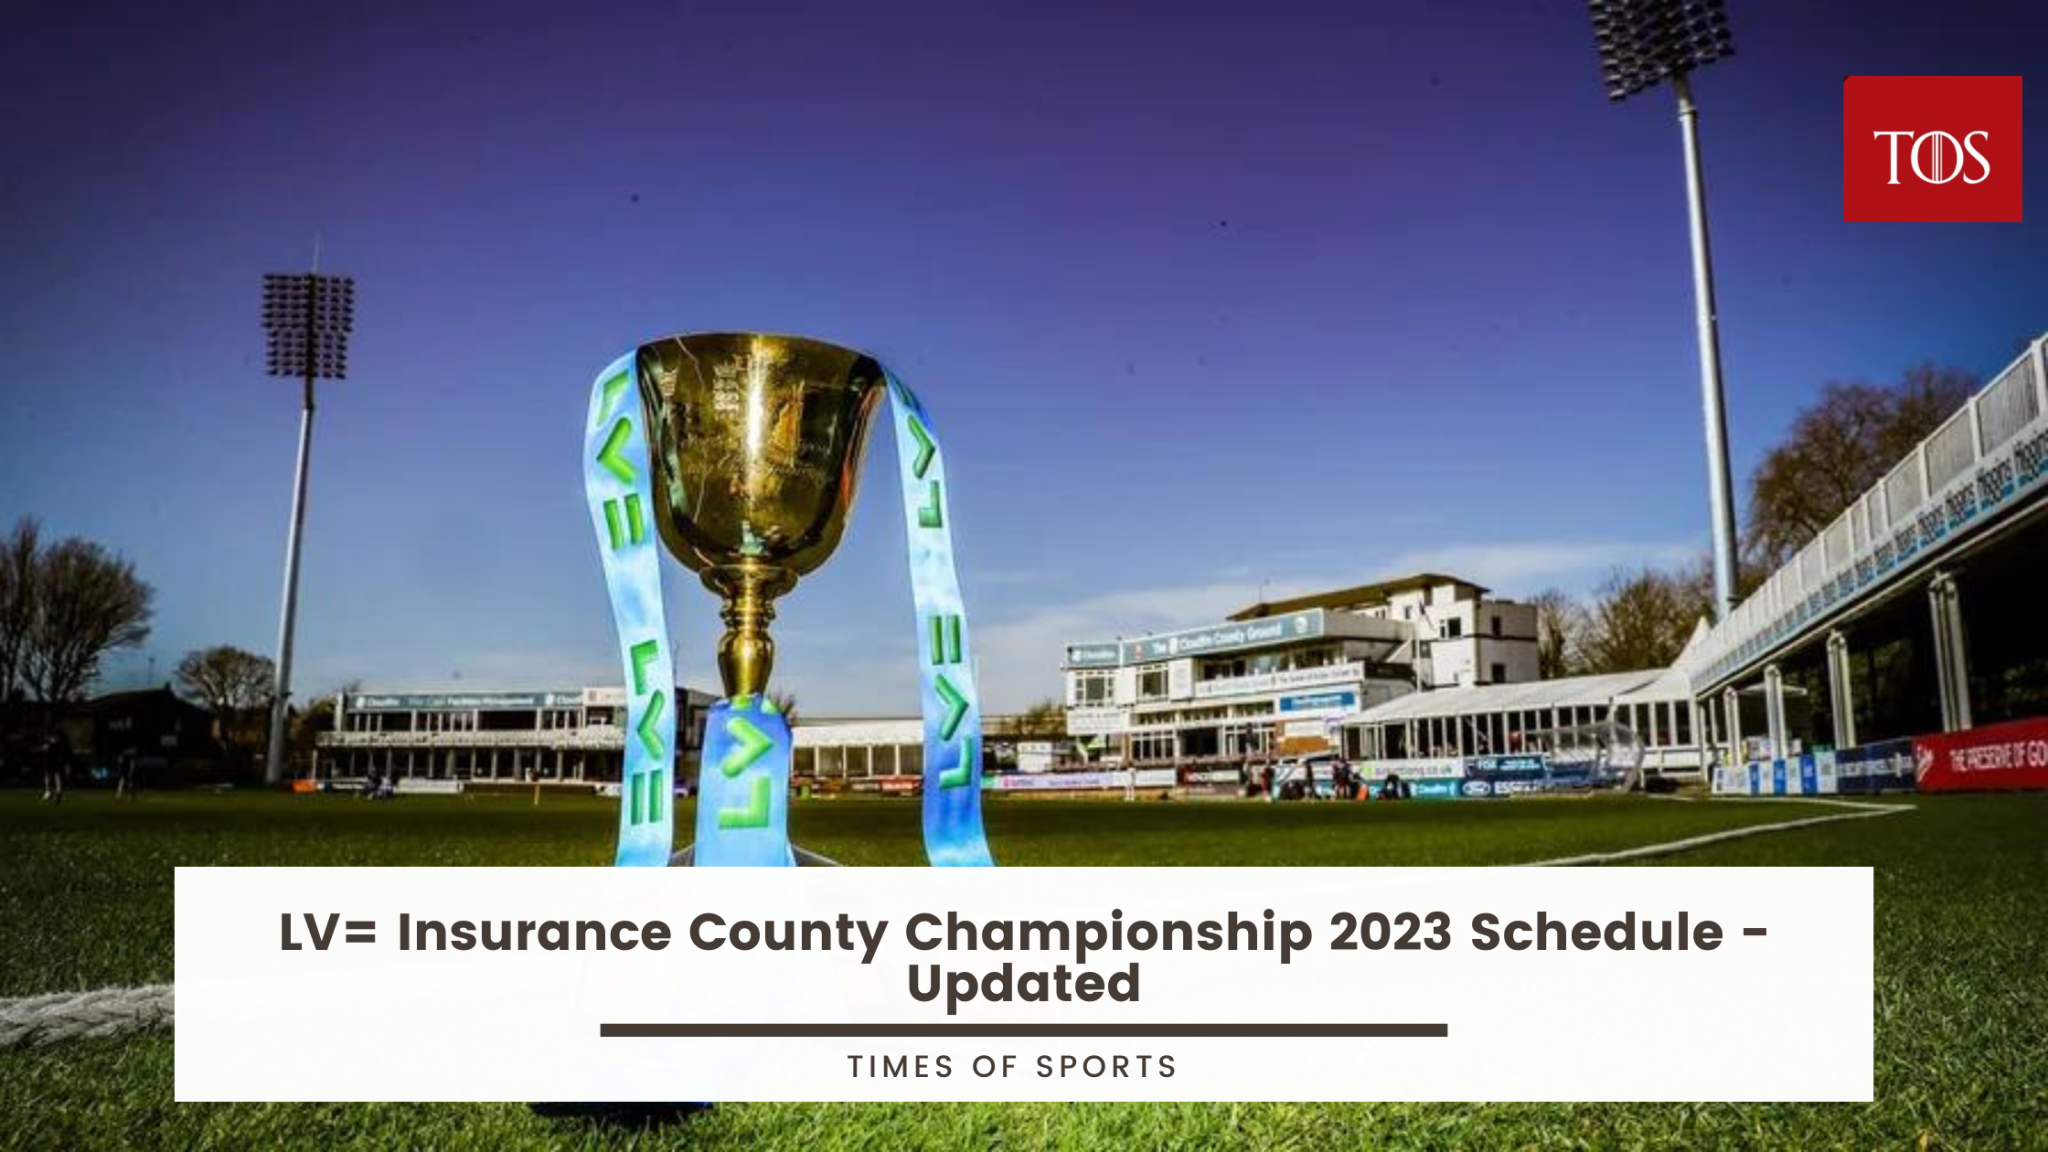 LV= Insurance County Championship 2023 Schedule Updated